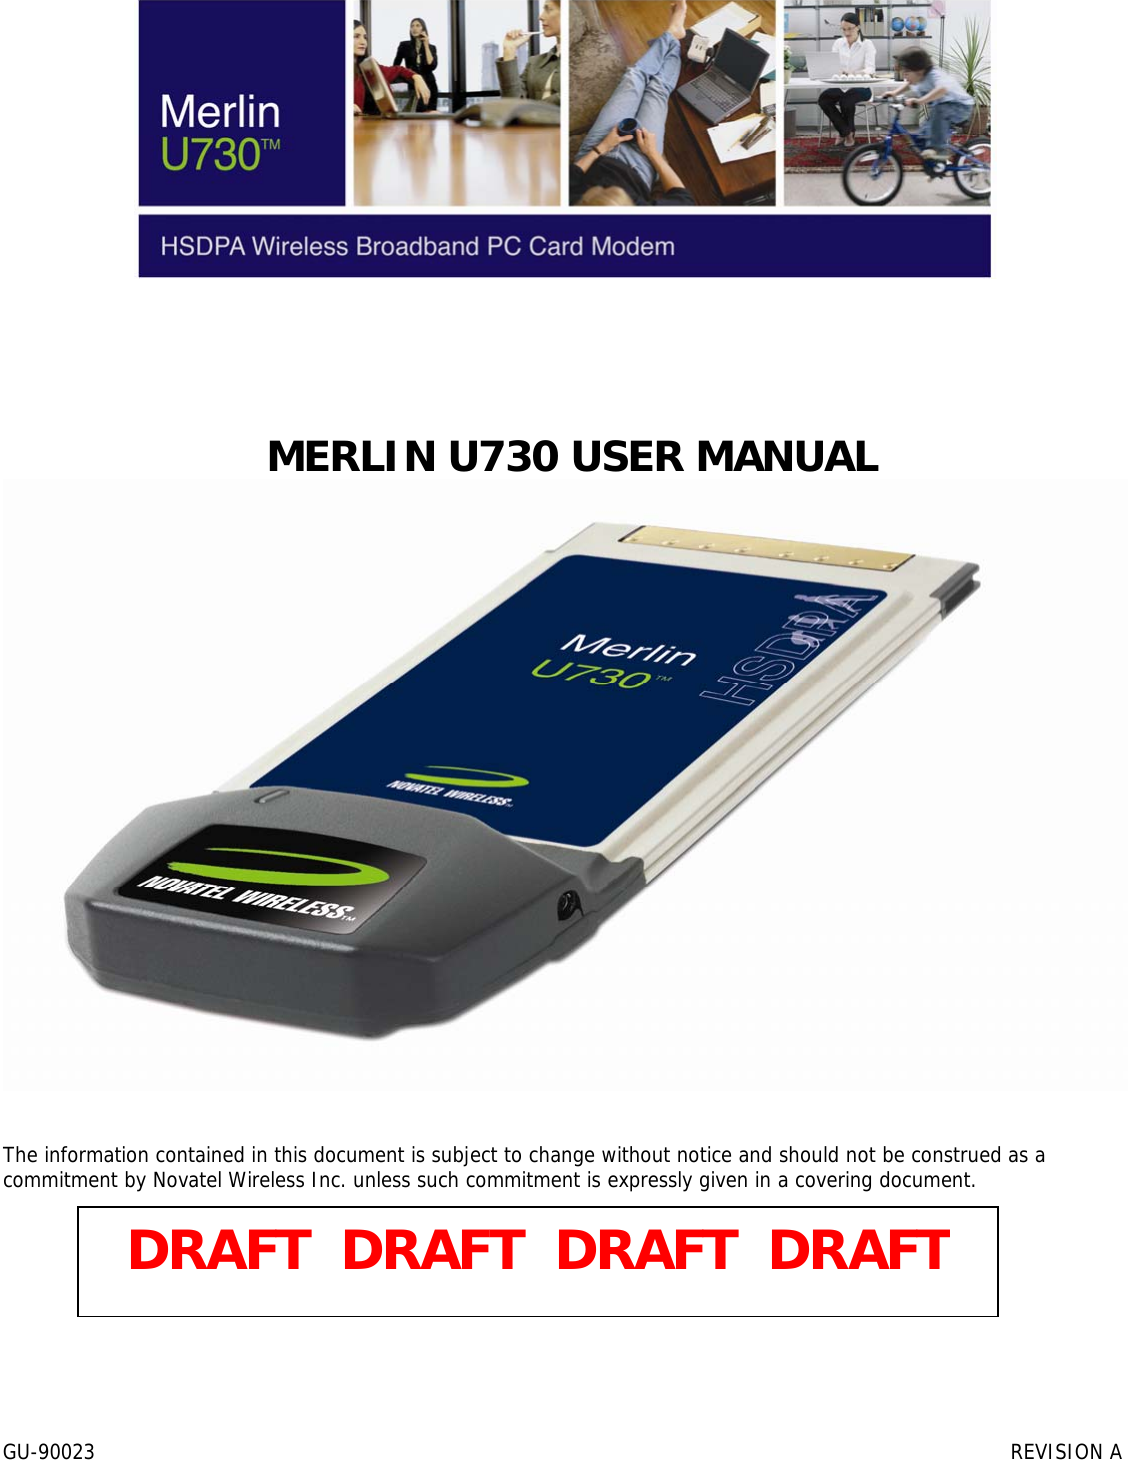  GU-90023           REVISION A               MERLIN U730 USER MANUAL    The information contained in this document is subject to change without notice and should not be construed as a commitment by Novatel Wireless Inc. unless such commitment is expressly given in a covering document.          DRAFT  DRAFT  DRAFT  DRAFT 